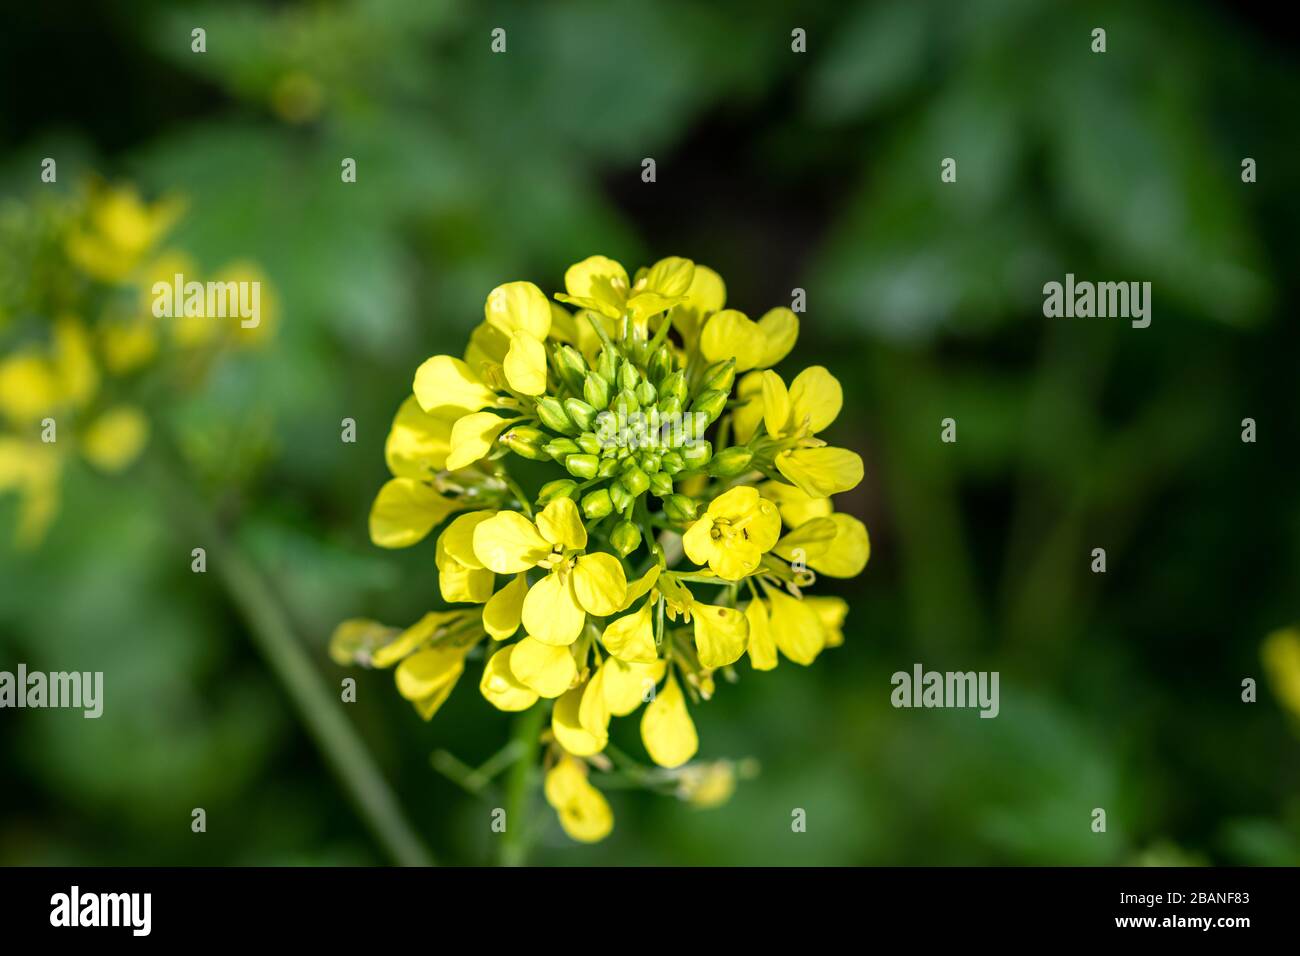 Close-up of yellow flowers of the Sinapis arvensis plant, blurred background Stock Photo